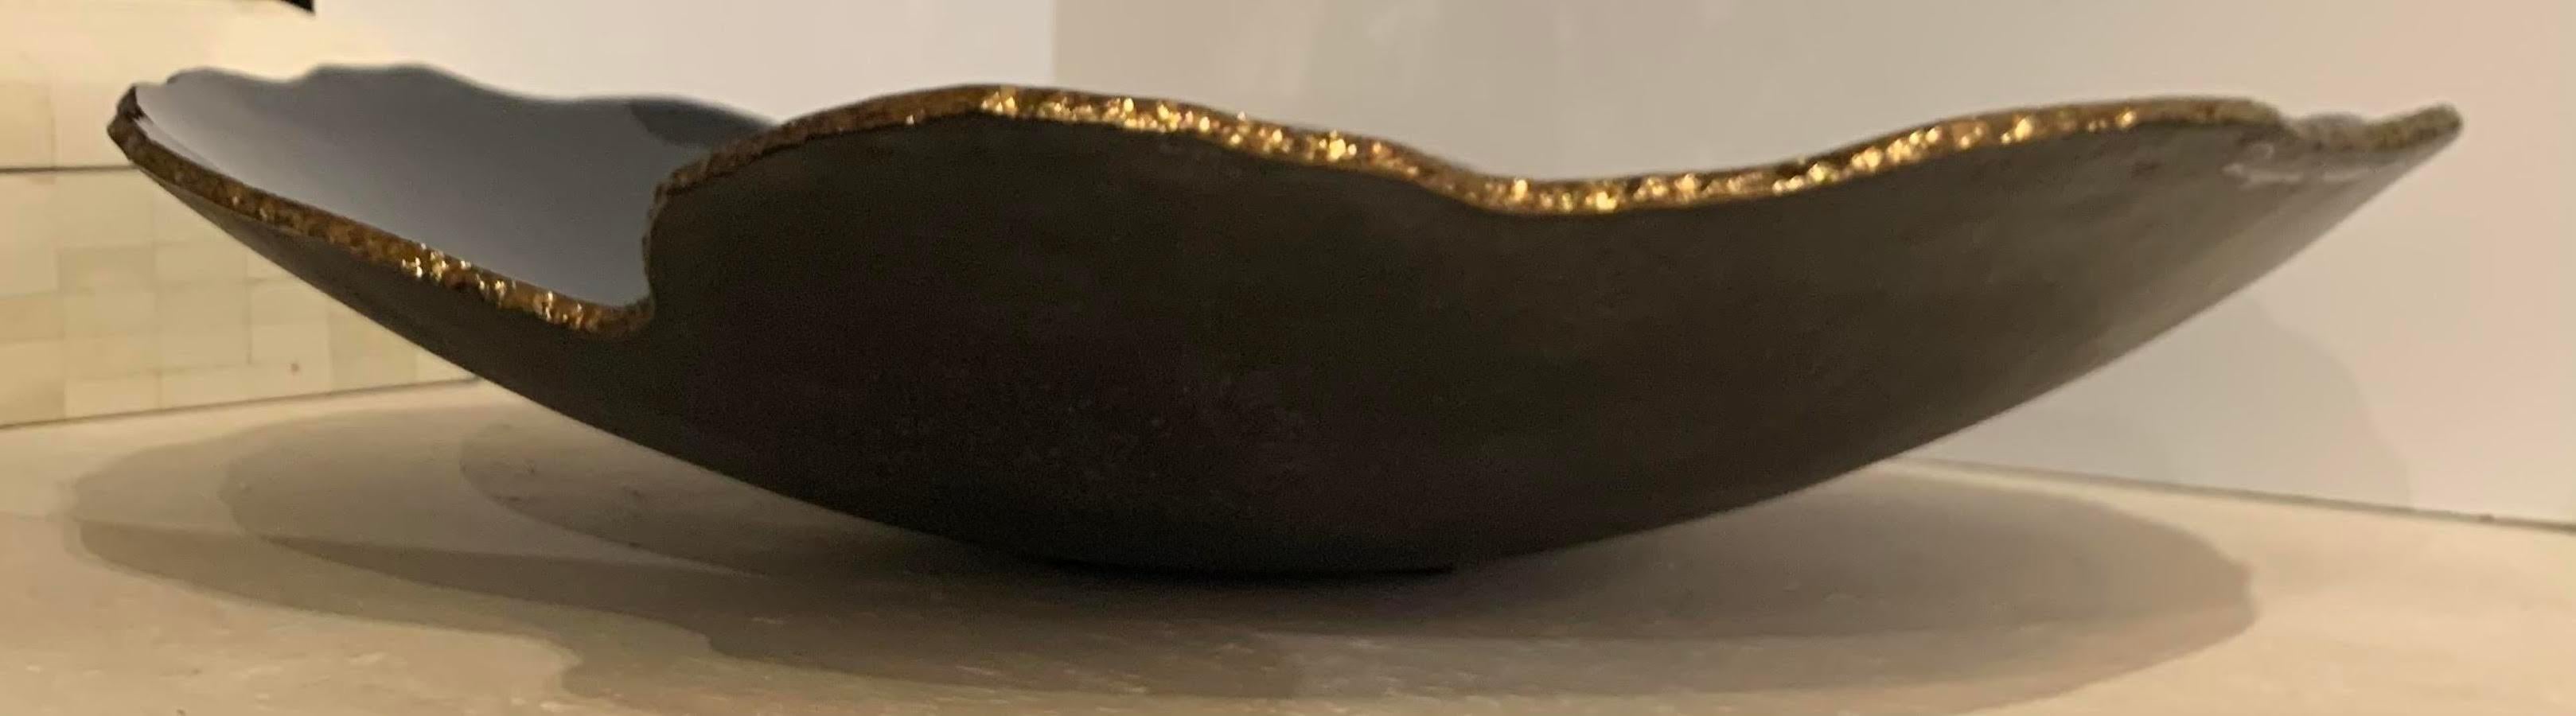 Brazilian Black High Gloss with Gold Edges Free Form Glass Bowl, Brazil, Contemporary